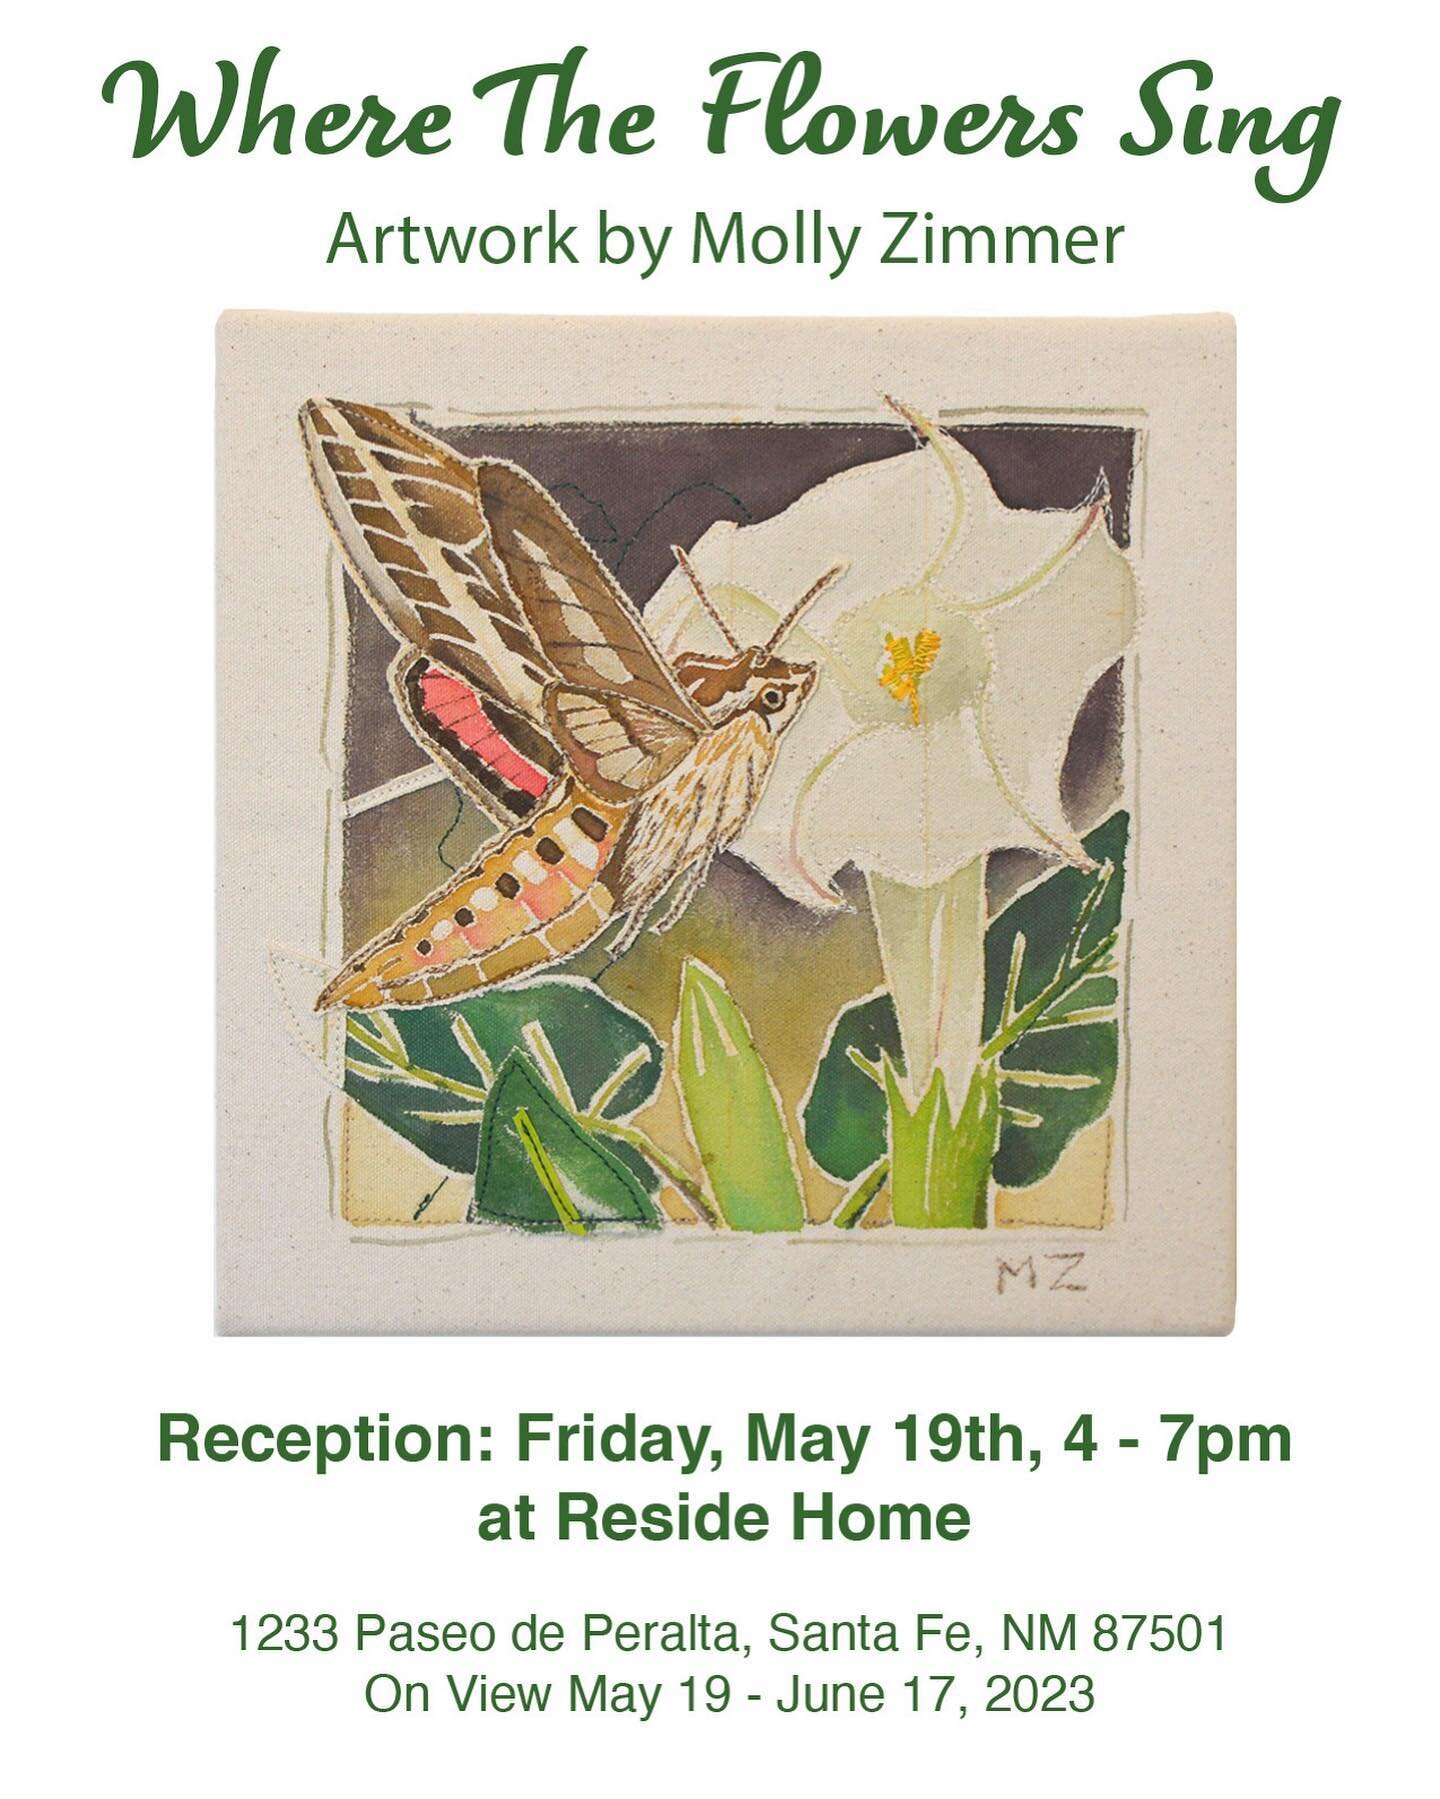 Next Friday, May 19th, 4-7pm @howyoureside &mdash; if you like flowers, insects, gardens, textiles, collage and learning about native NM plants&mdash; bring a friend and join me for the opening reception!